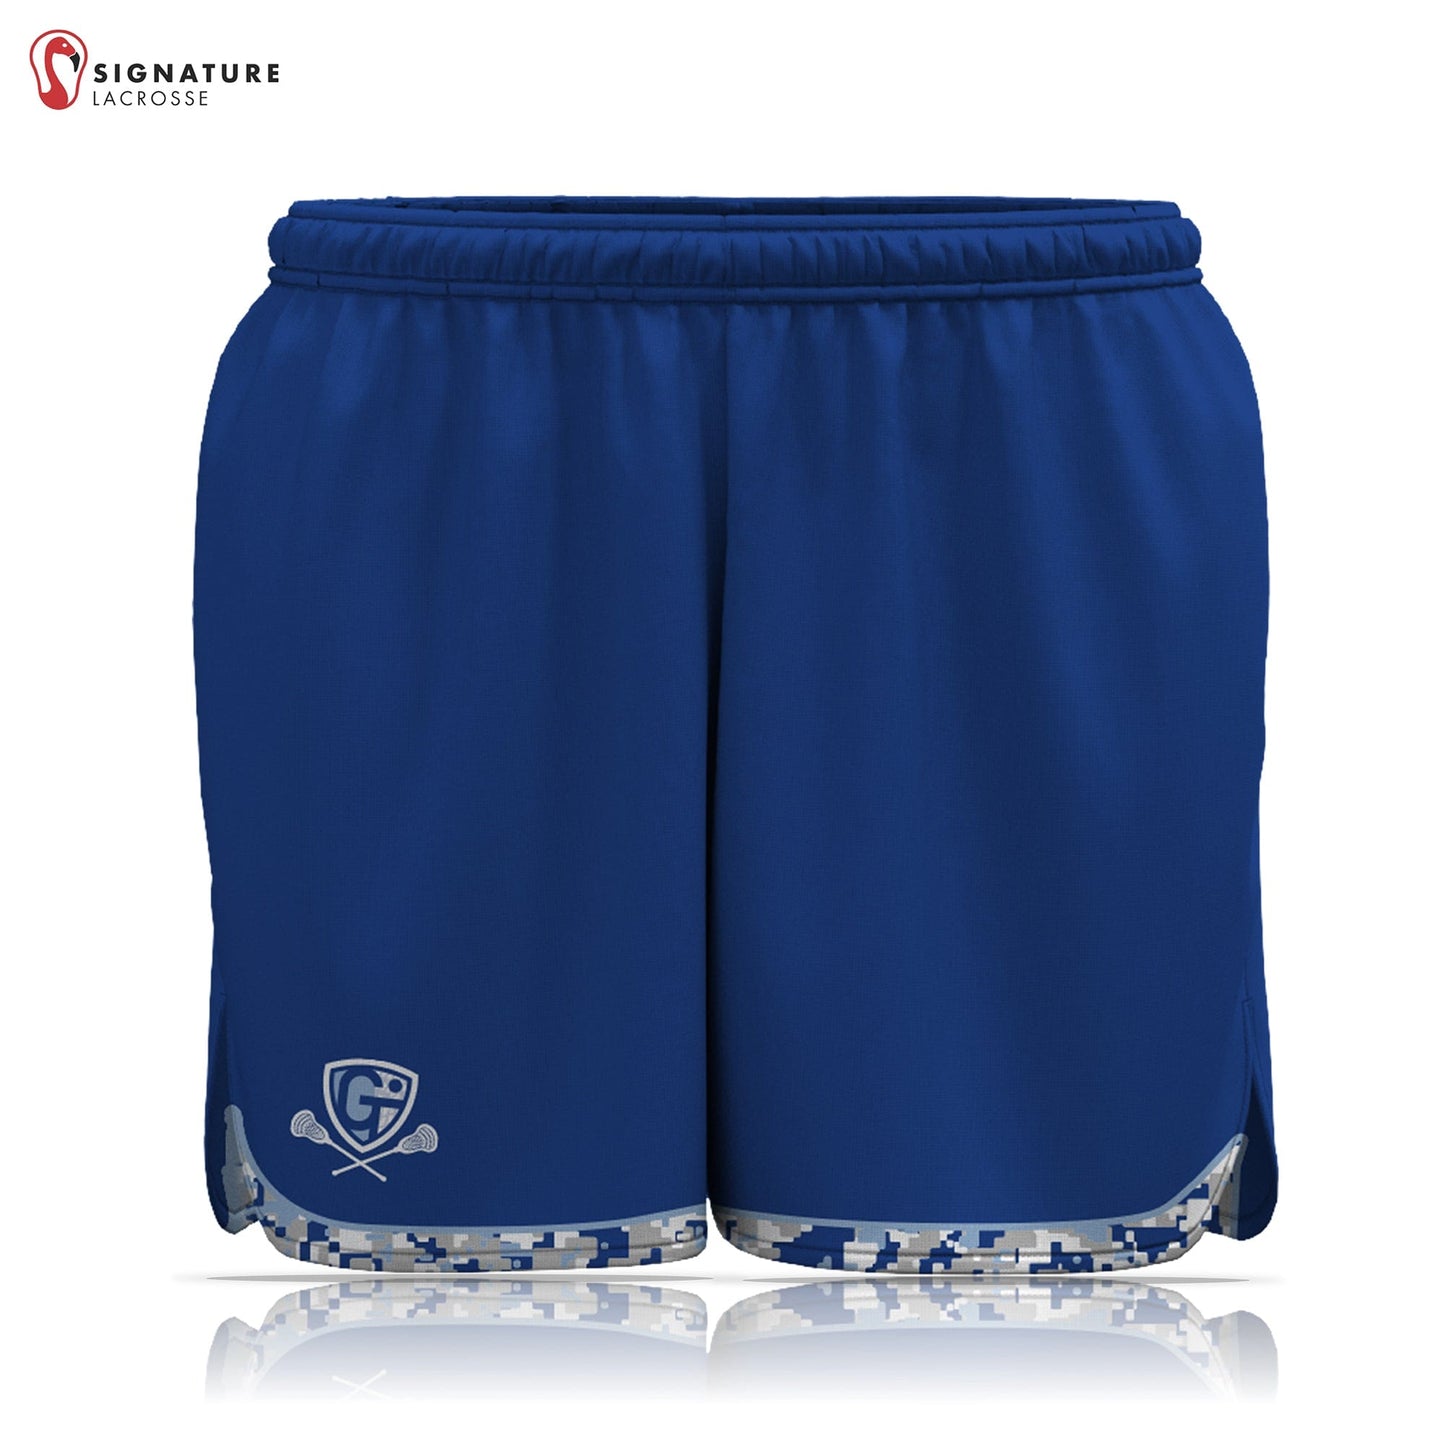 Georgetown-Triton Youth Lacrosse Women's Player Game Shorts: 7-8 Signature Lacrosse